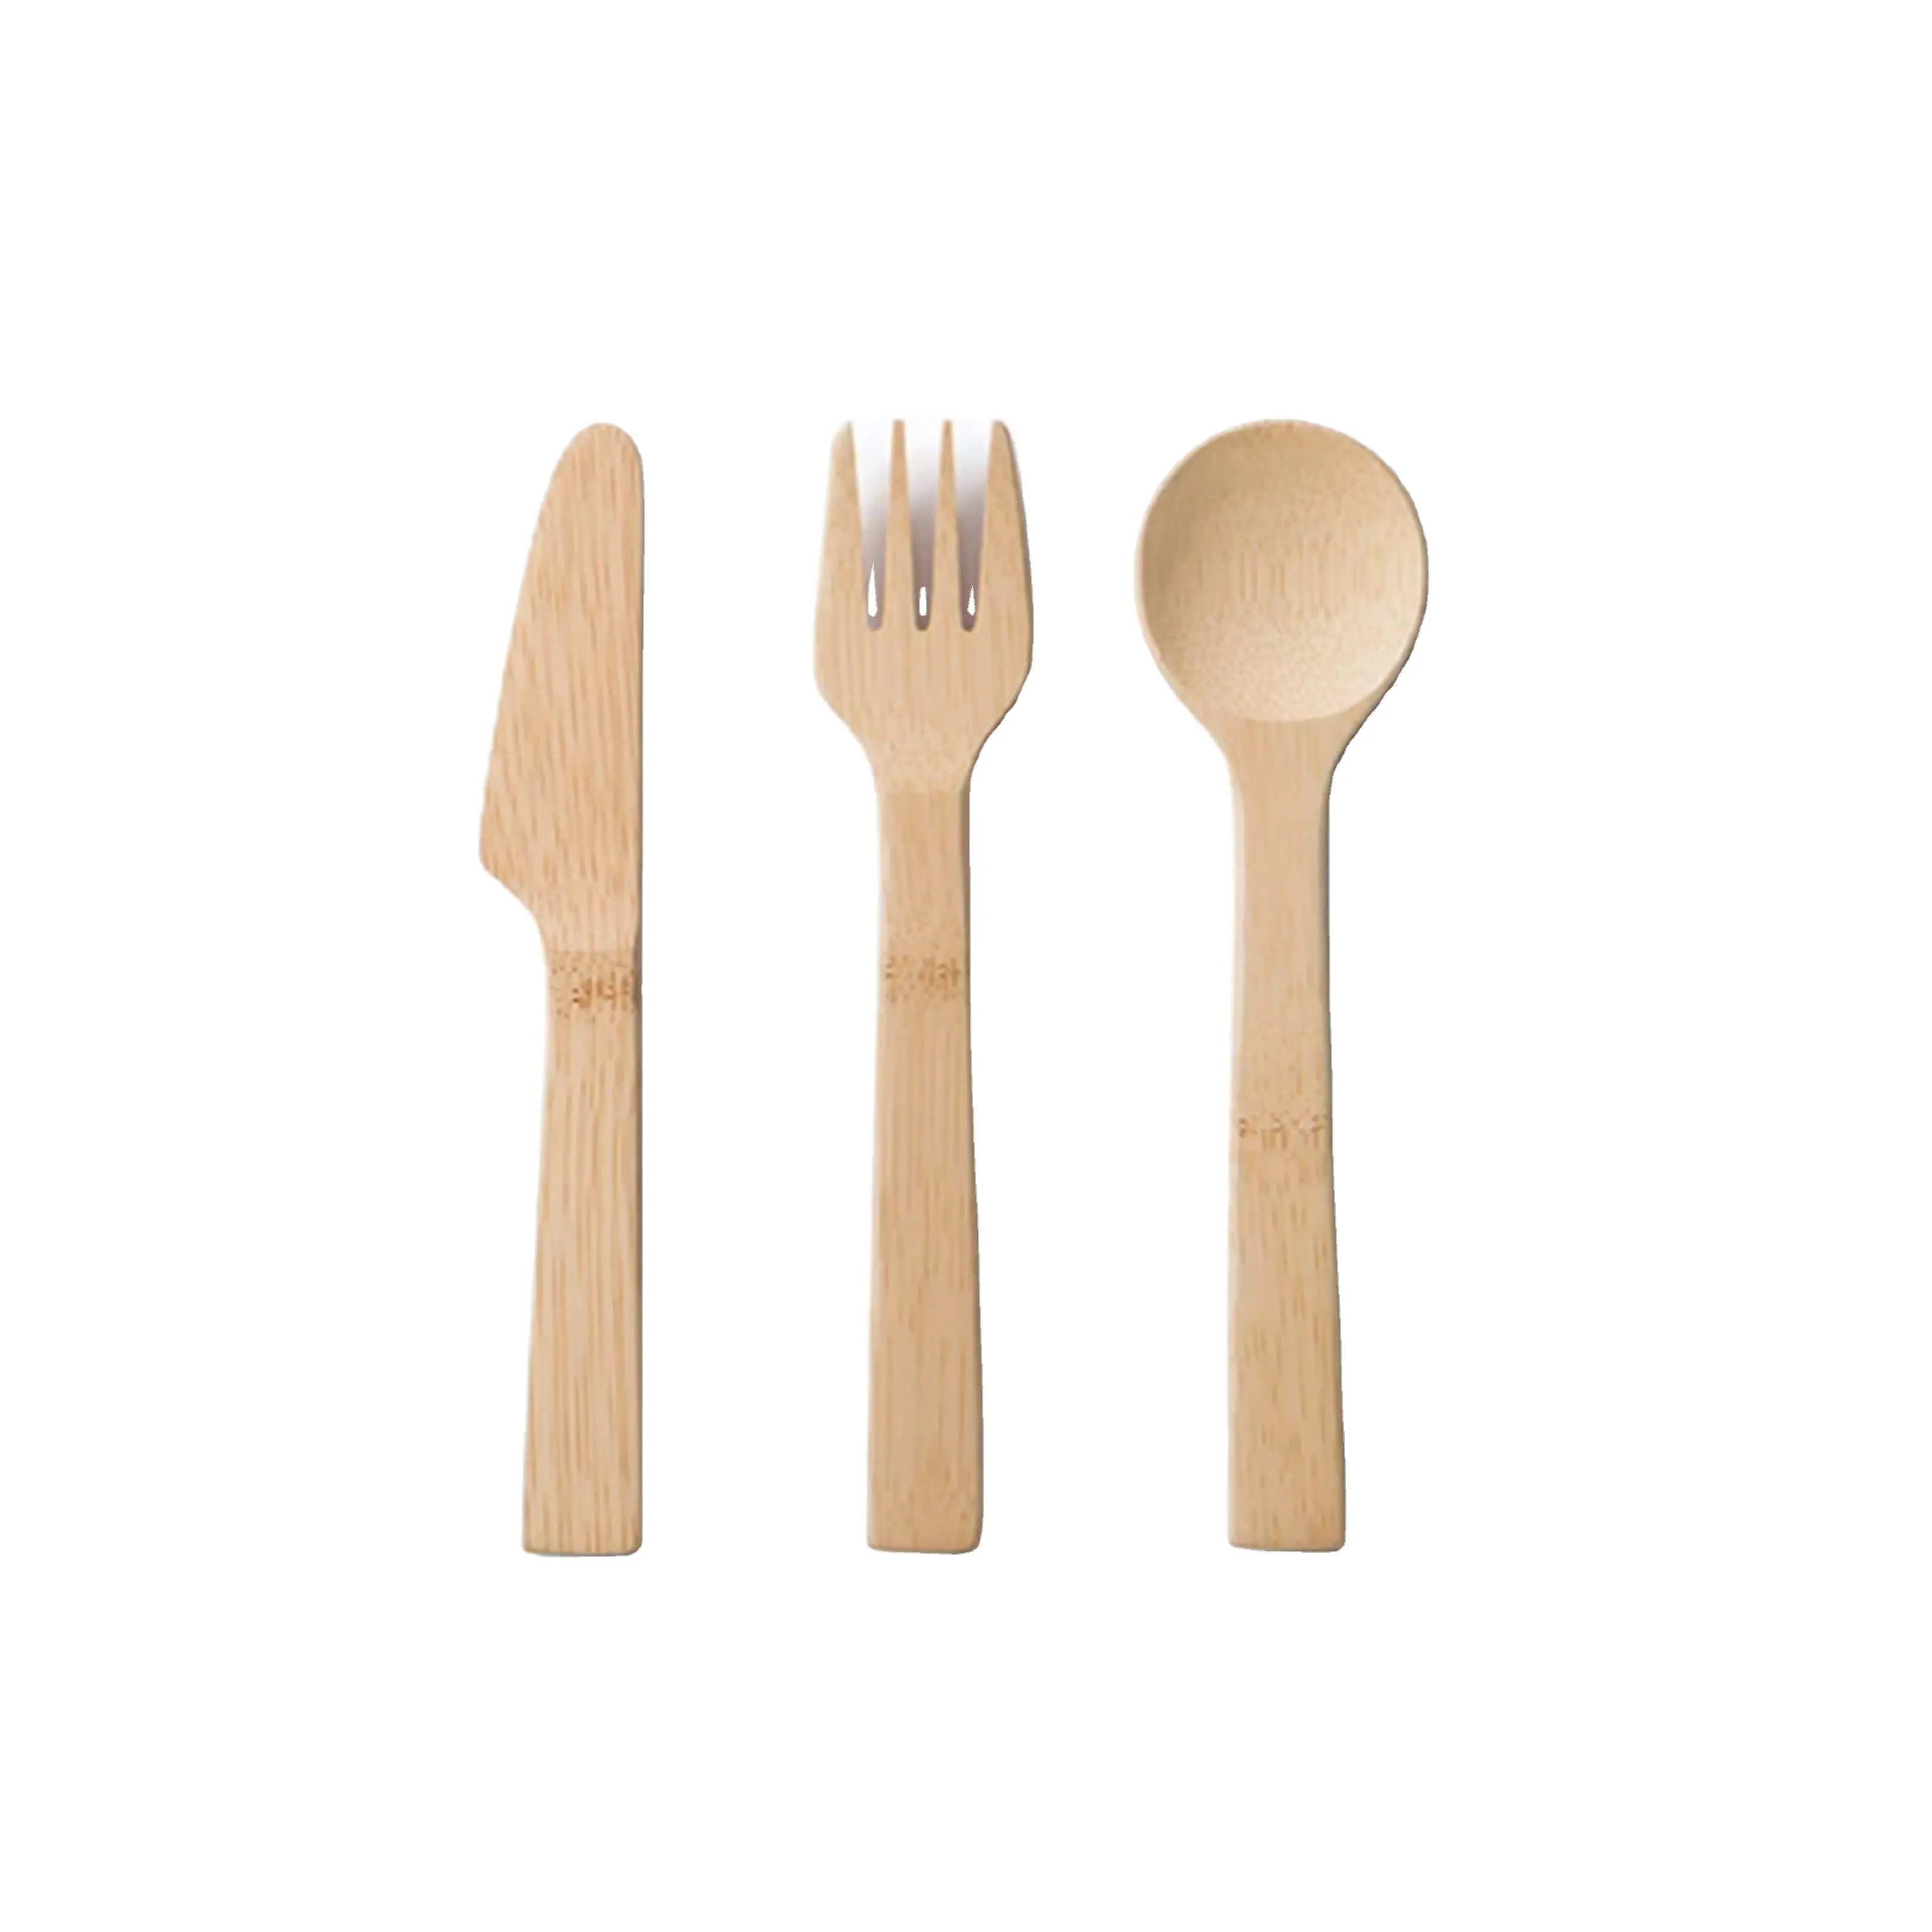 Amazon hot selling Birch wooden spoons, Forks, and knives reusable Biodegradable tableware flatware